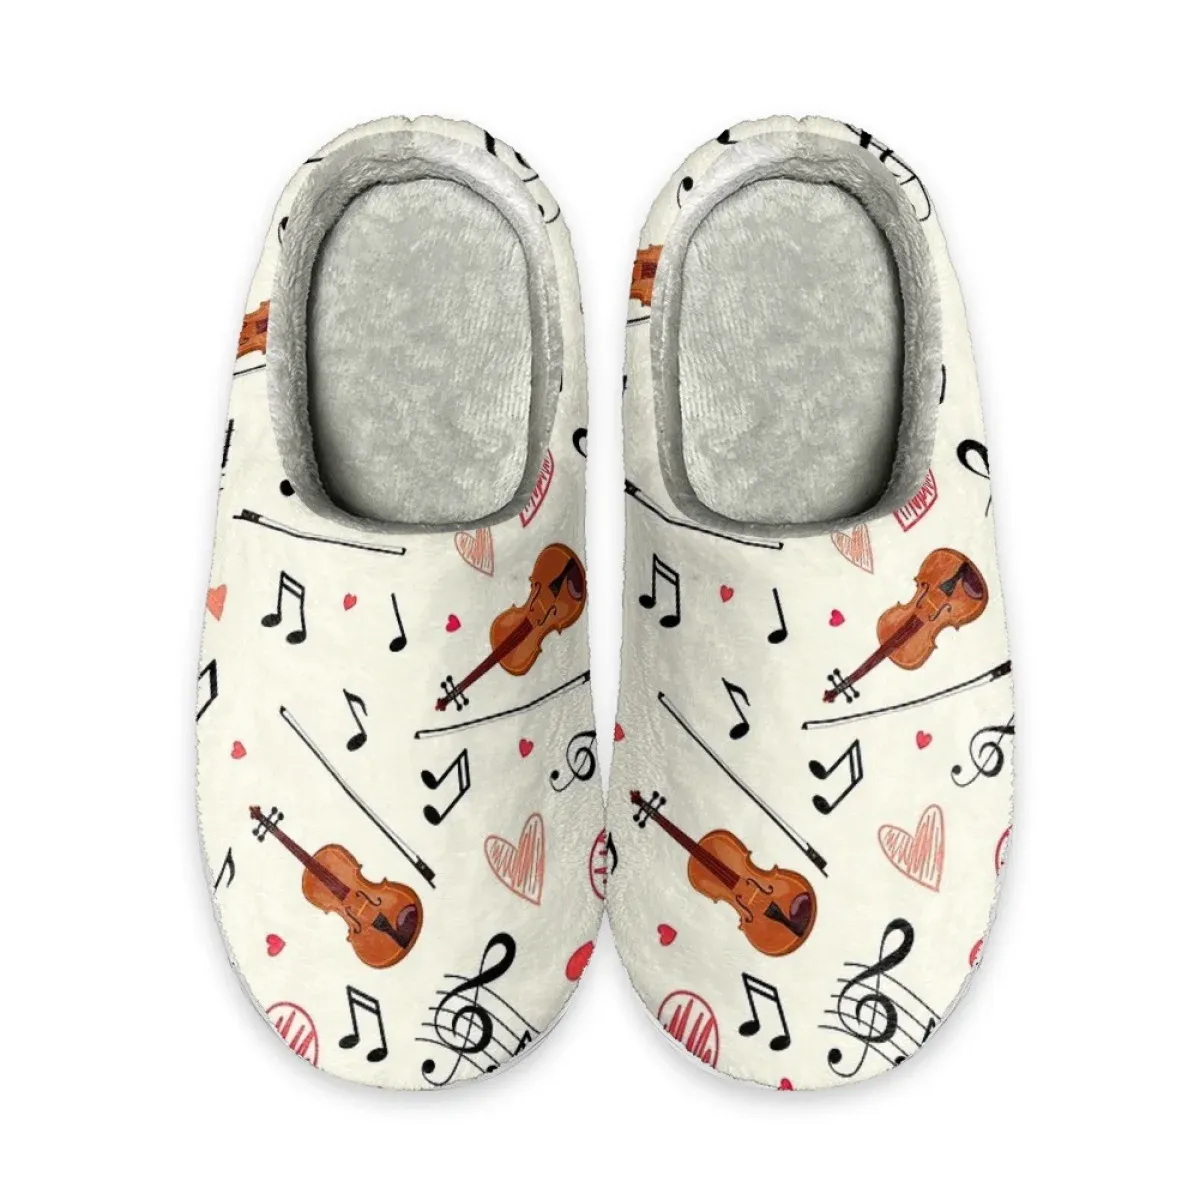 Slippers Beliodome Violin Design WomenS Home Cotton Memory Foam Slippers Indoor Slip On Shoes Lightweight Bedroom Slipper Rubber Sole